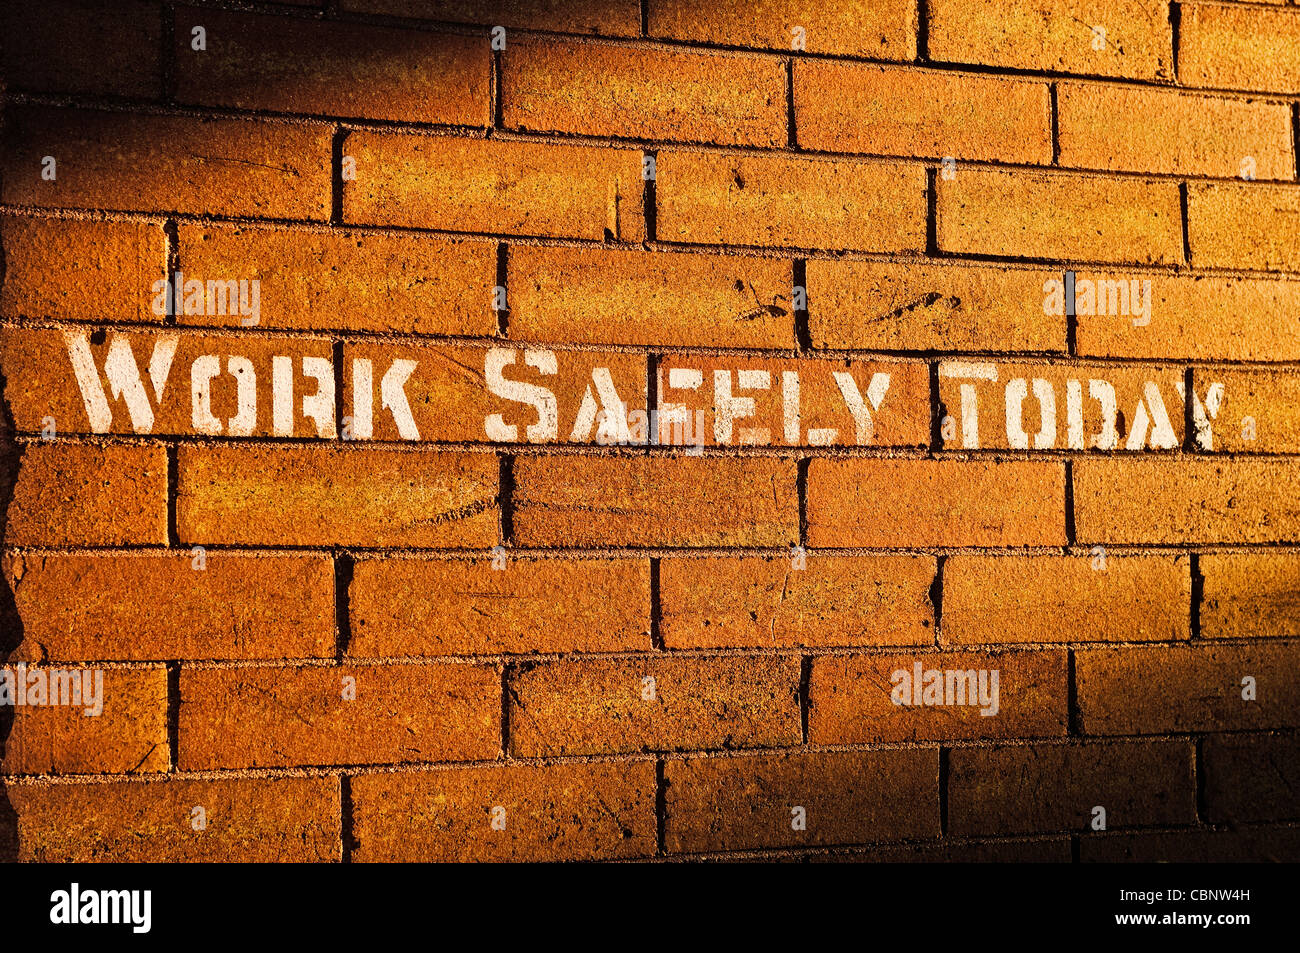 Words stenciled on brick wall reading 'Work Safely Today' Stock Photo